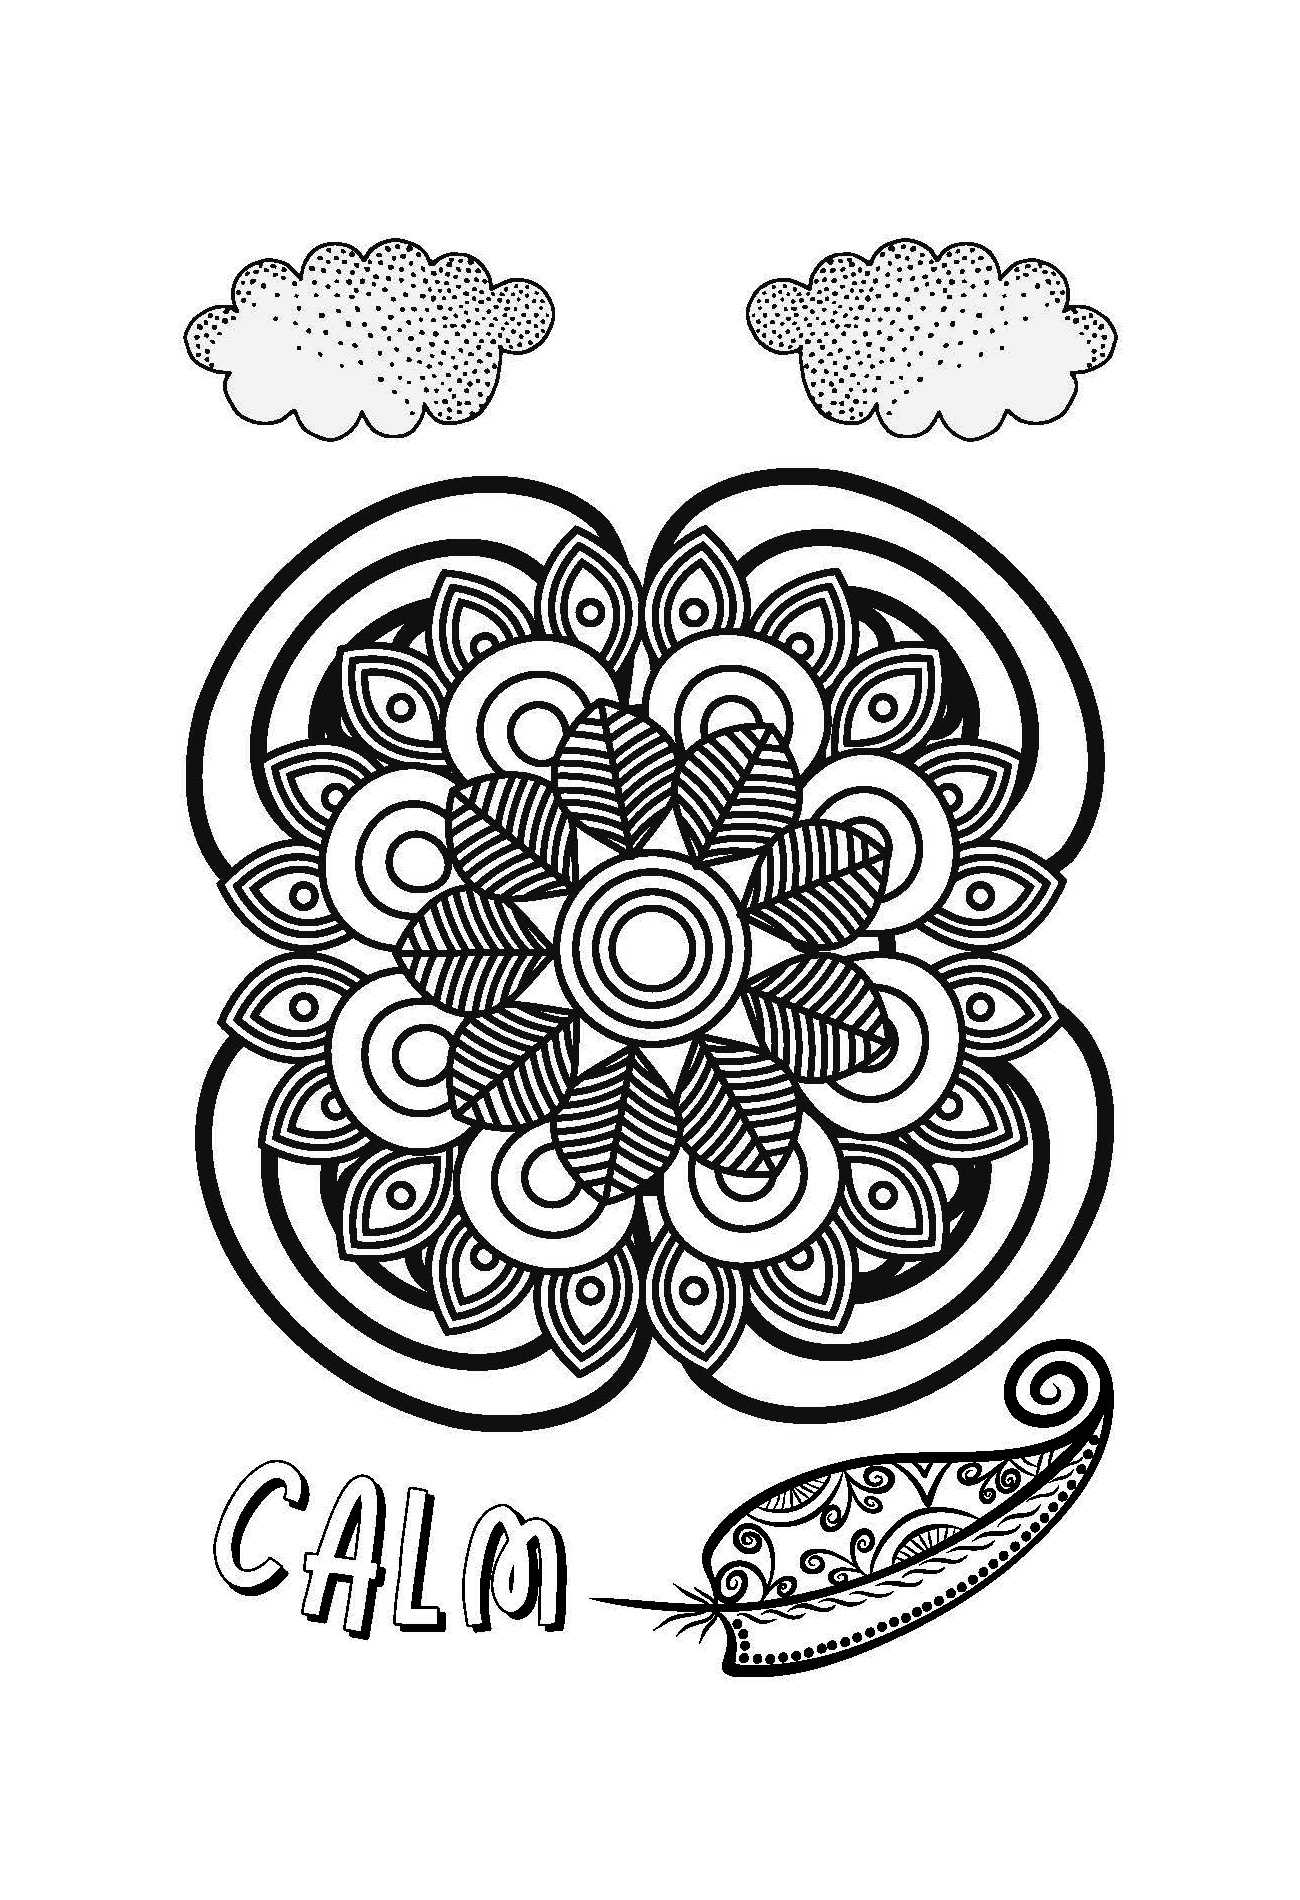 Calm Colouring Page - Digital Download